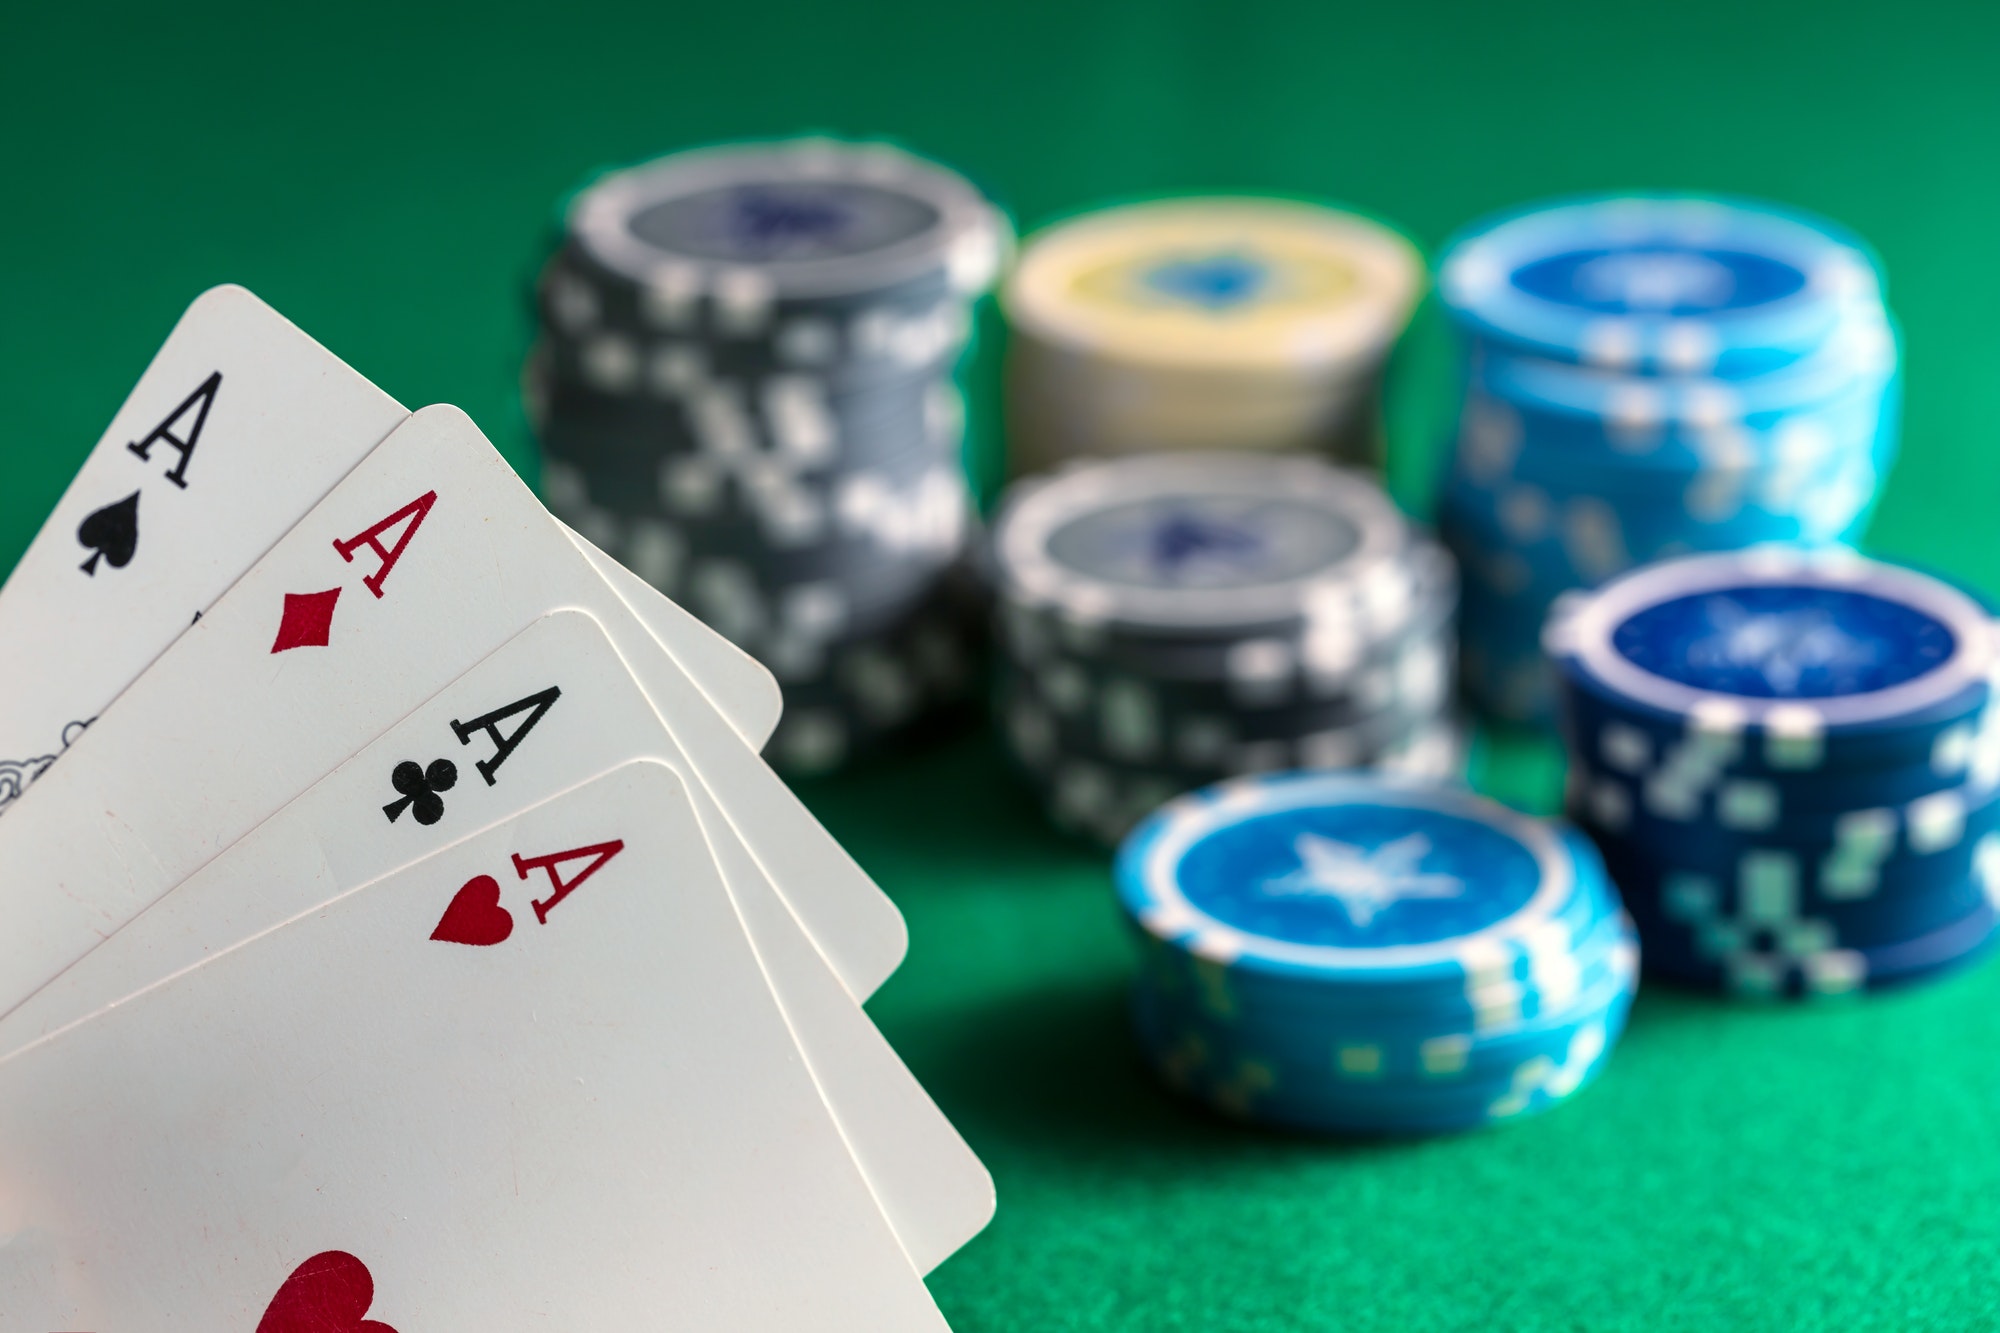 Difficult for prospective gamblers to choose an online casino